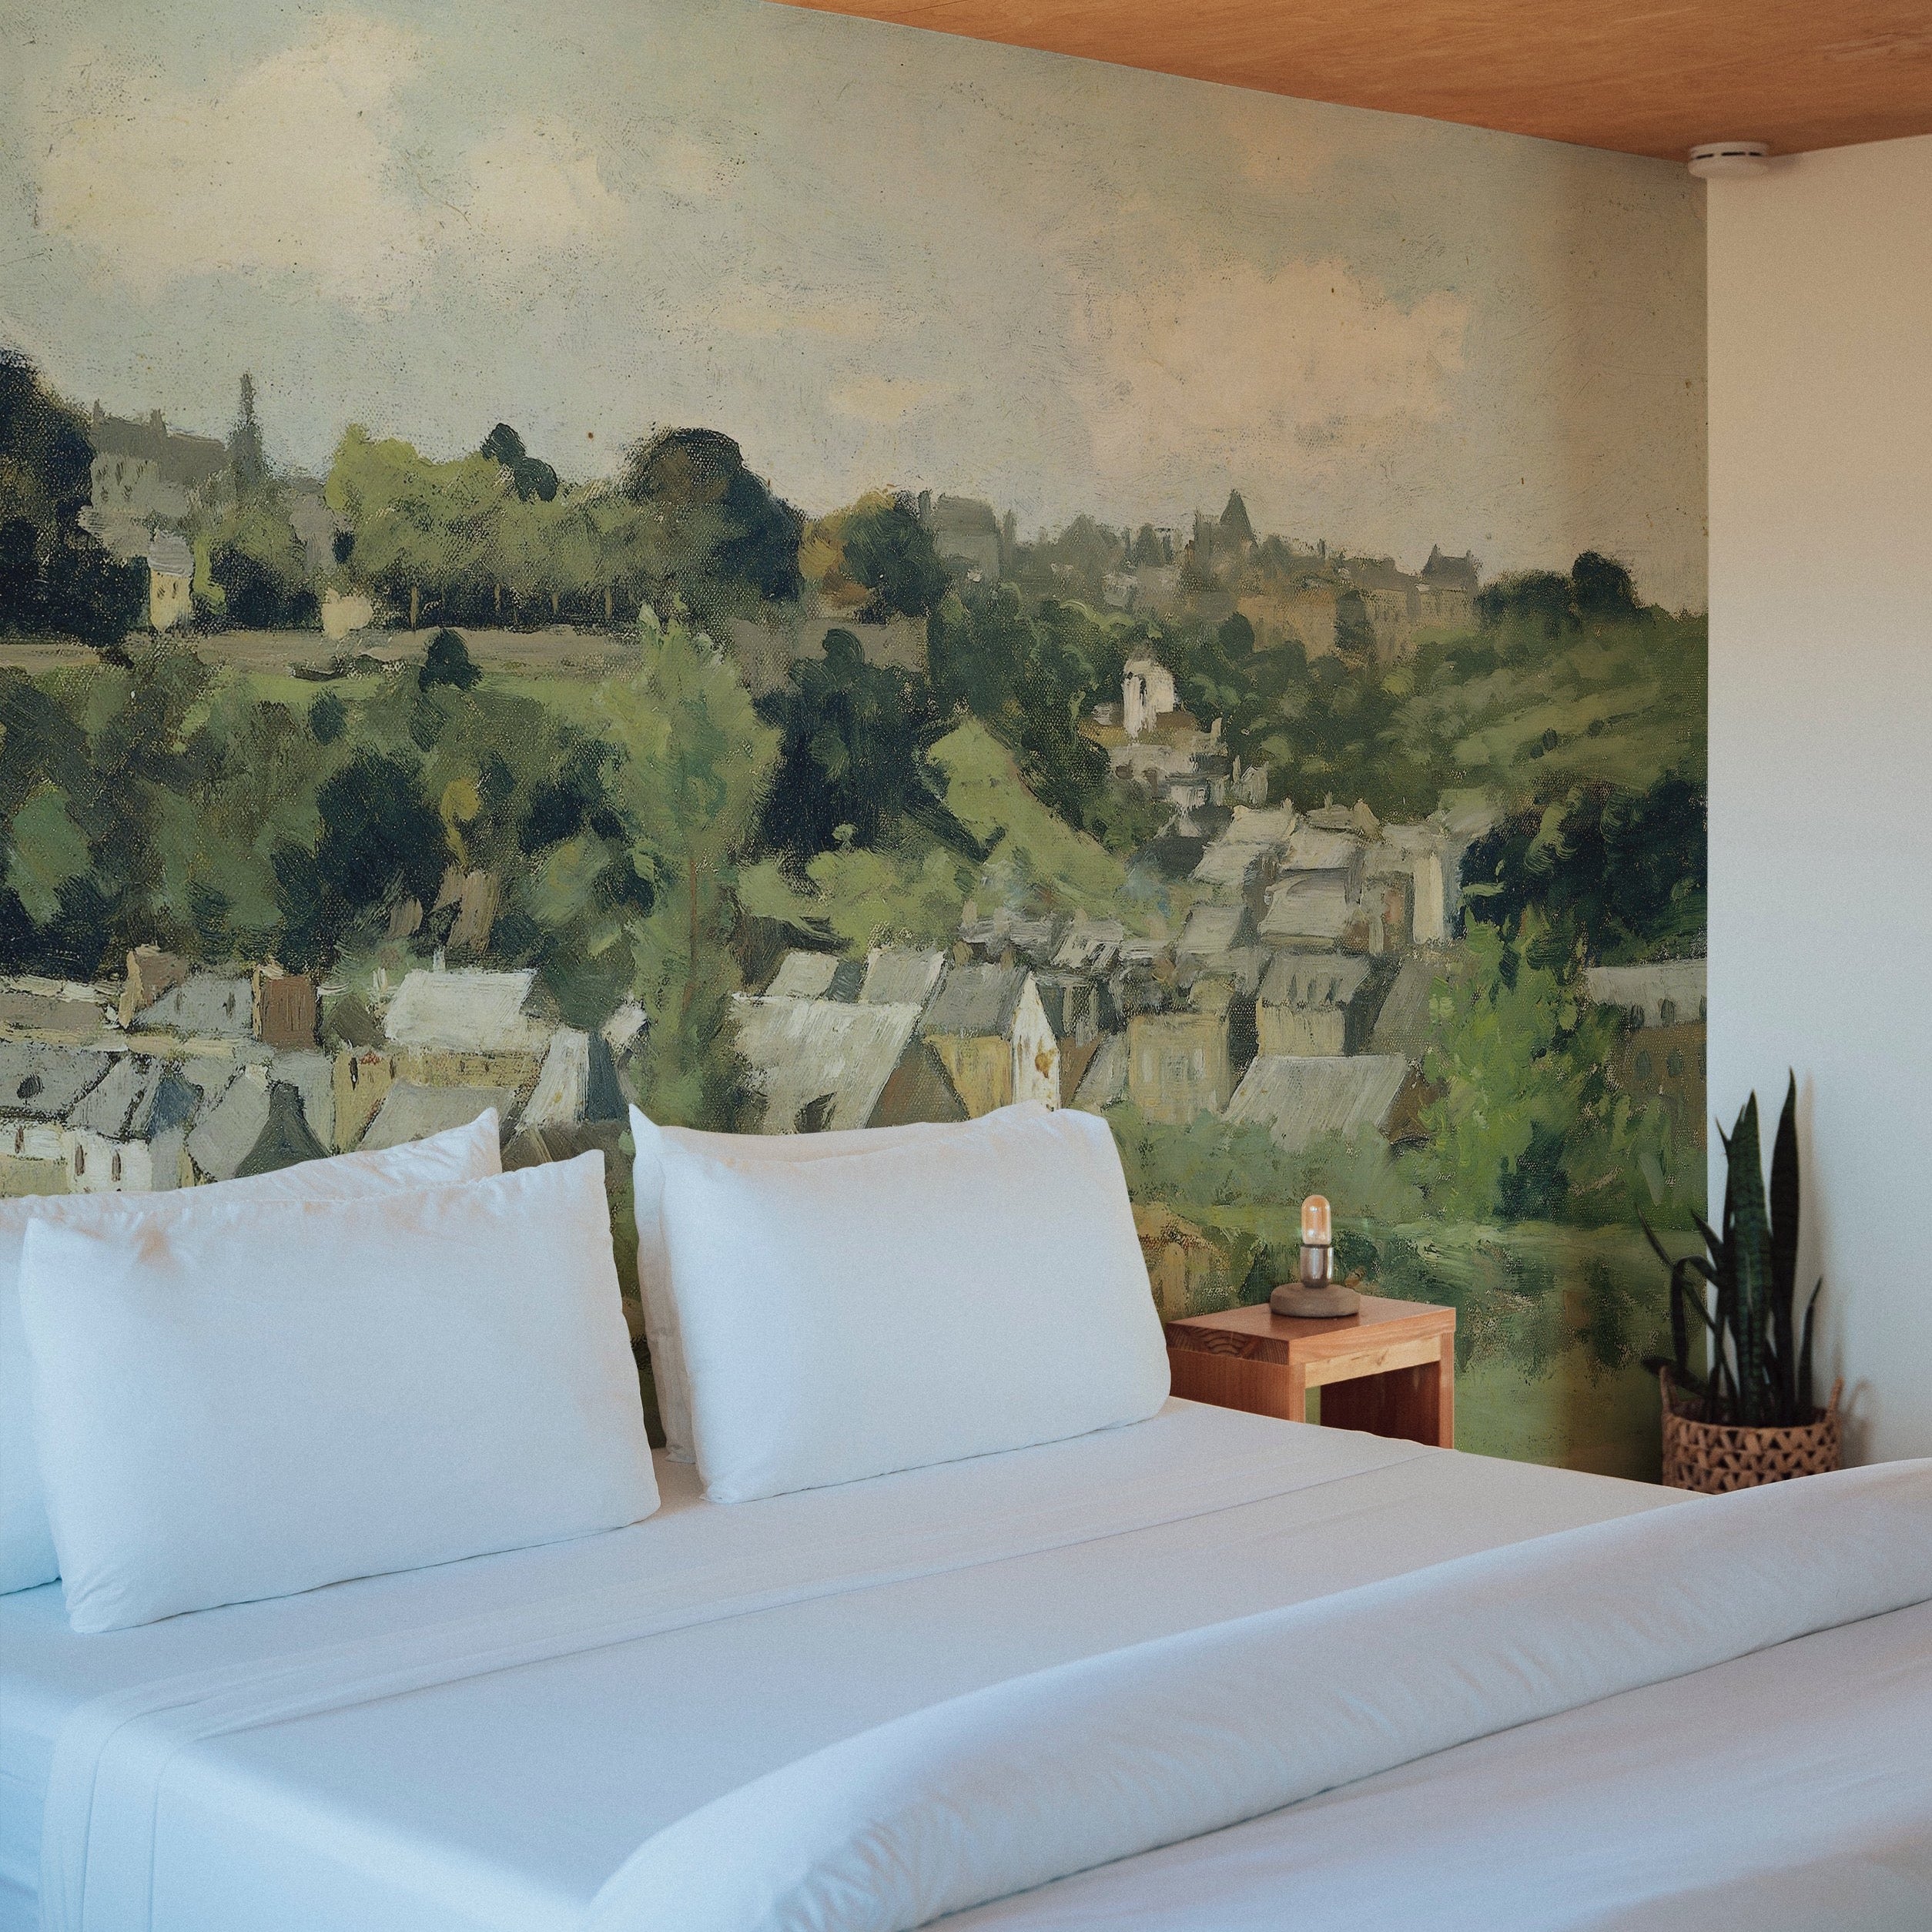 A bedroom setting enriched with a 'Views - Vintage Wall Mural', presenting a serene village scene. The mural serves as a stunning backdrop to a simple bed setup, complementing the room with its rich, earthy tones and peaceful landscape.